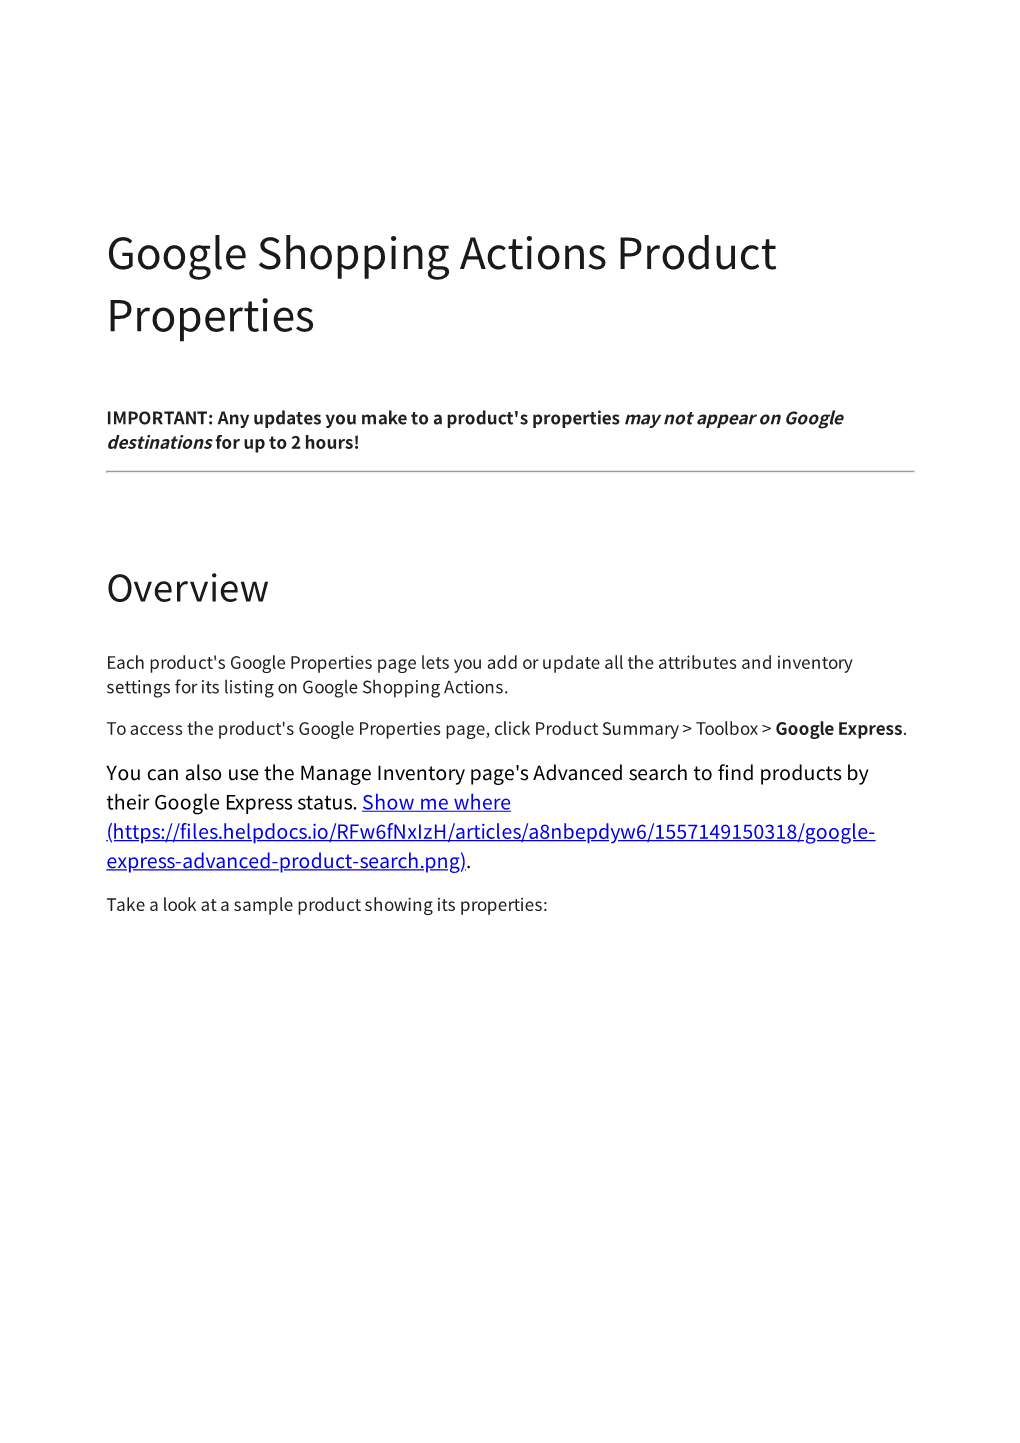 Google Shopping Actions Product Properties